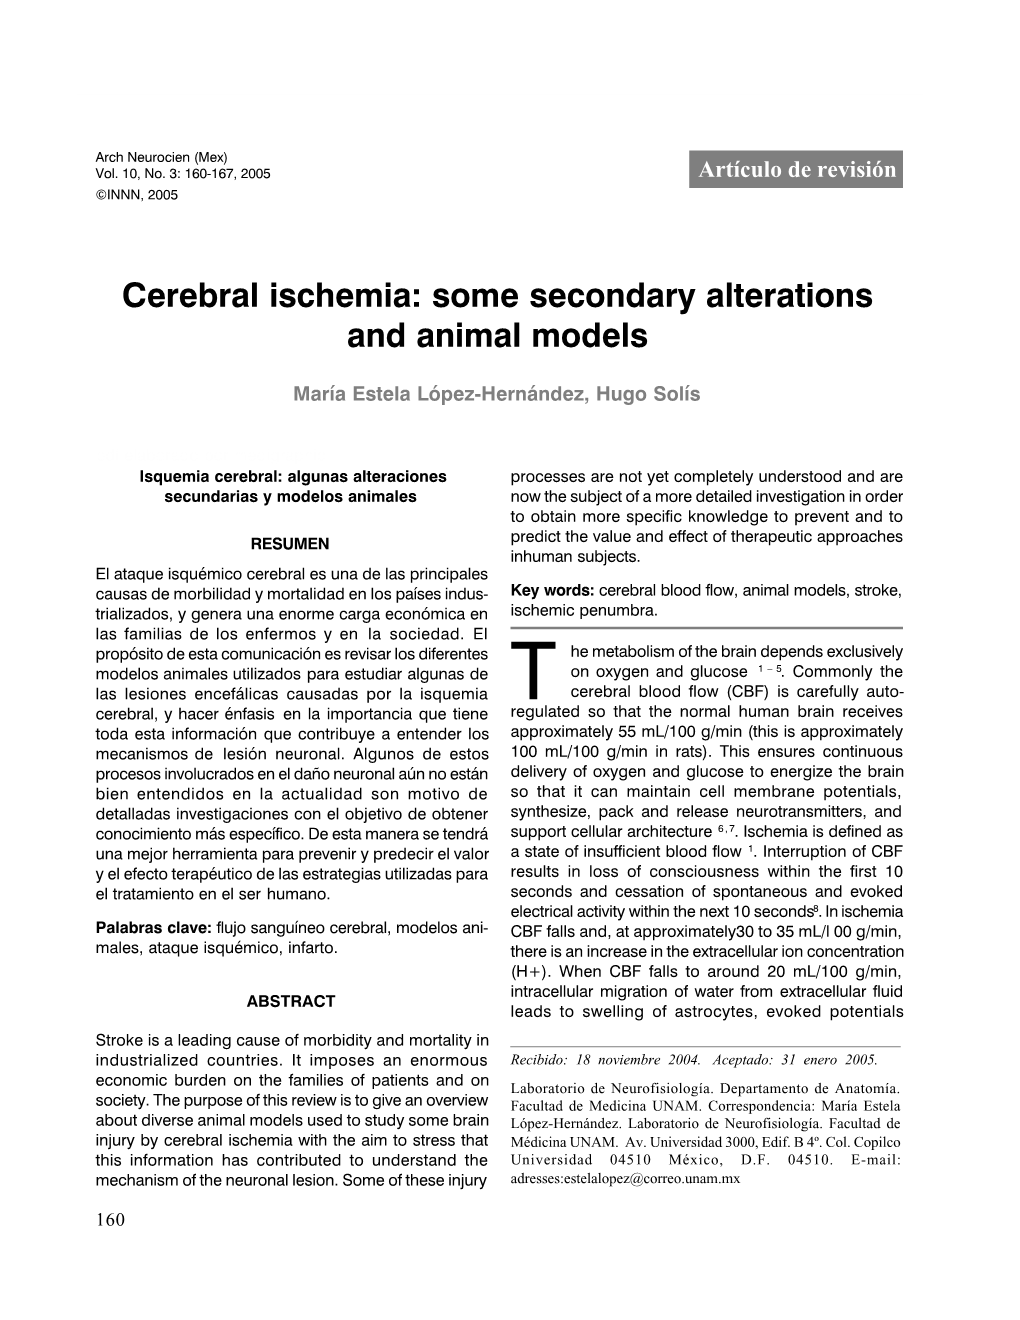 Cerebral Ischemia: Some Secondary Alterations and Animal Models